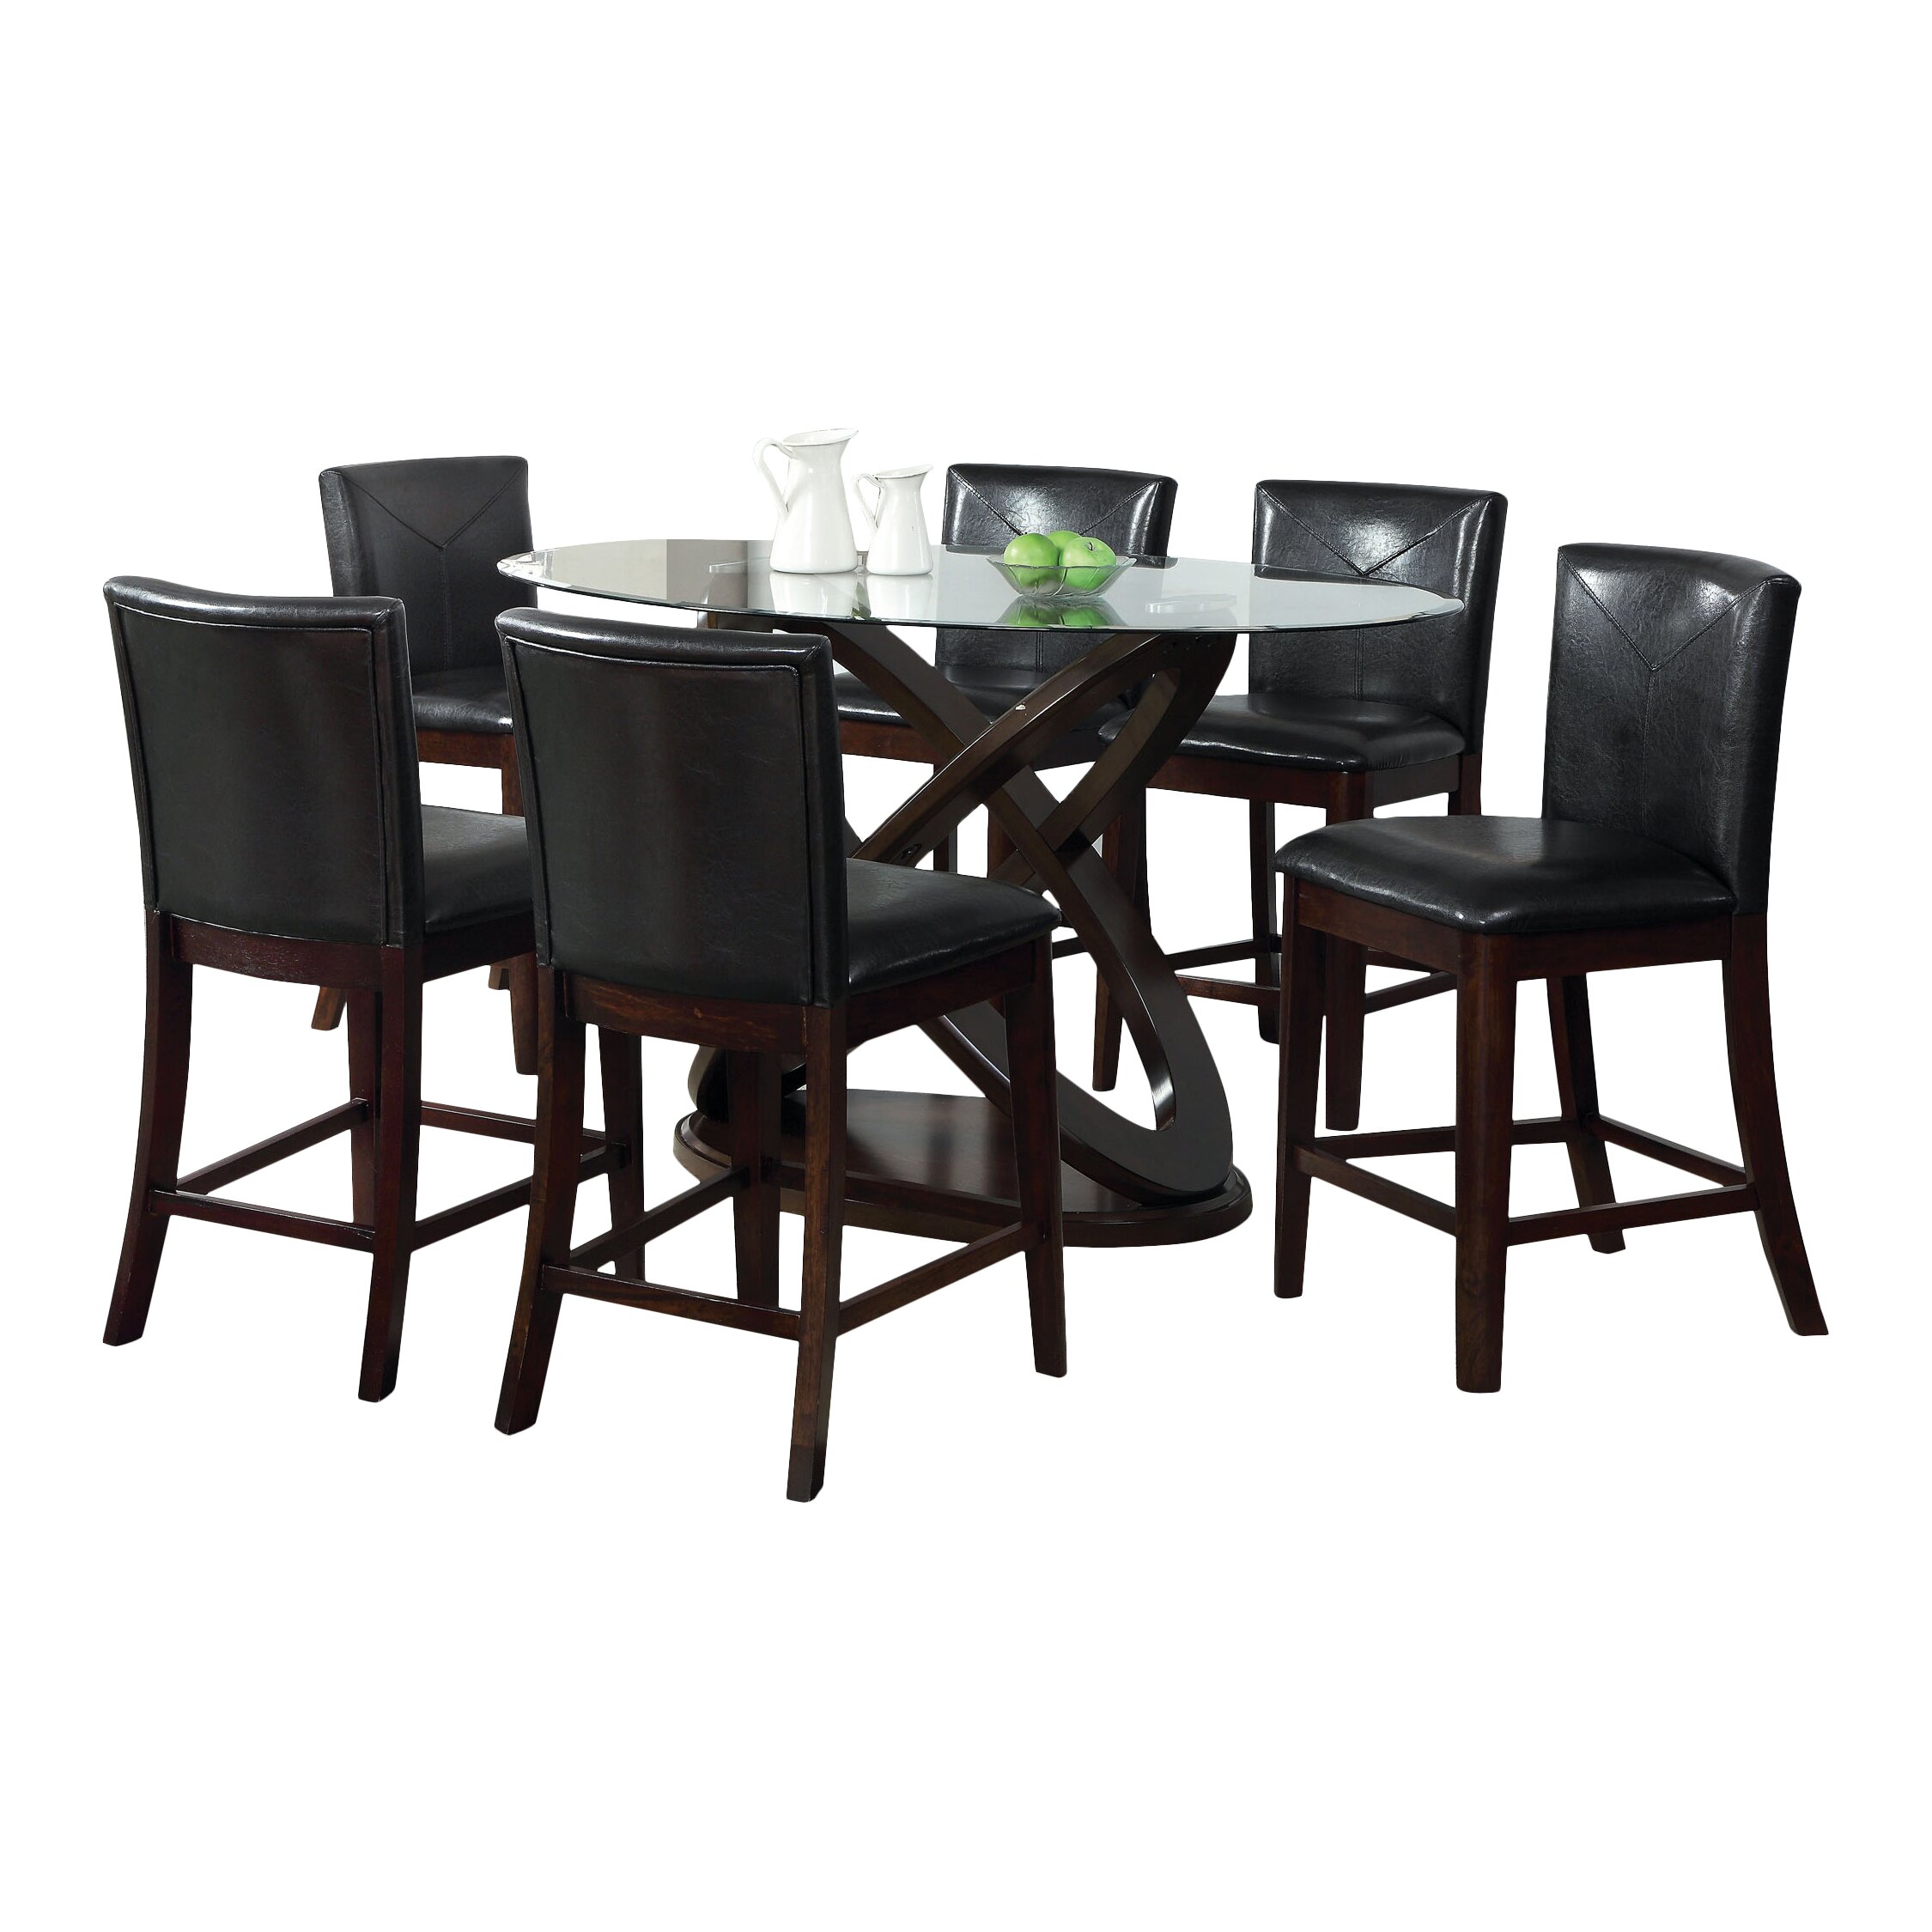 Check out All of these ollivander 7 piece counter height dining set for
your house